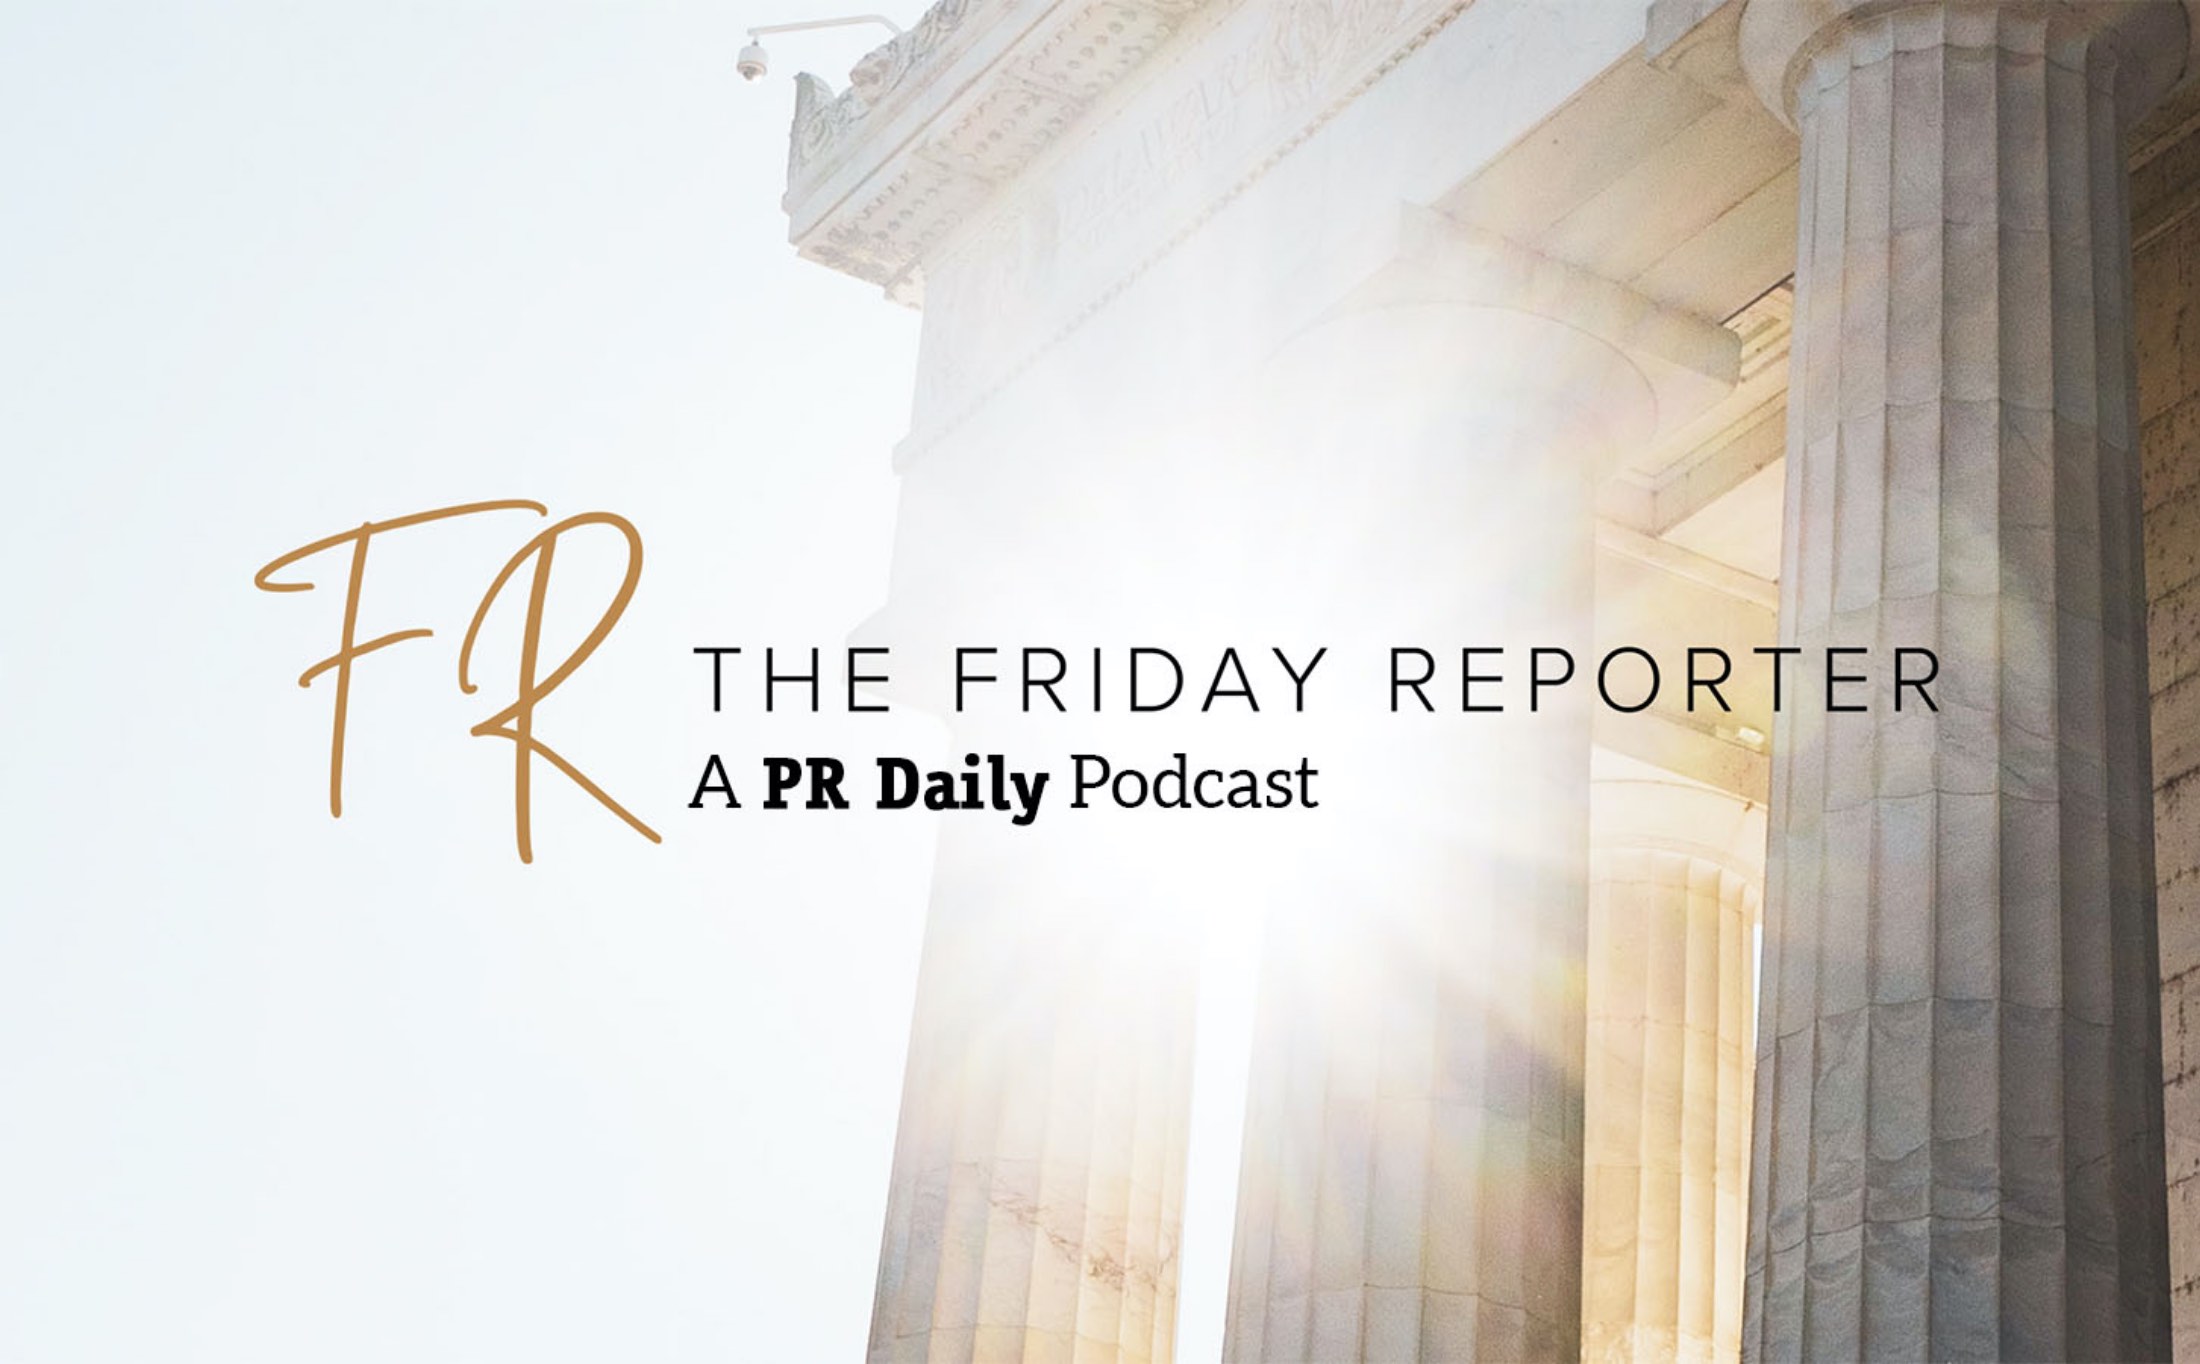 The Friday Reporter, a PR Daily podcast